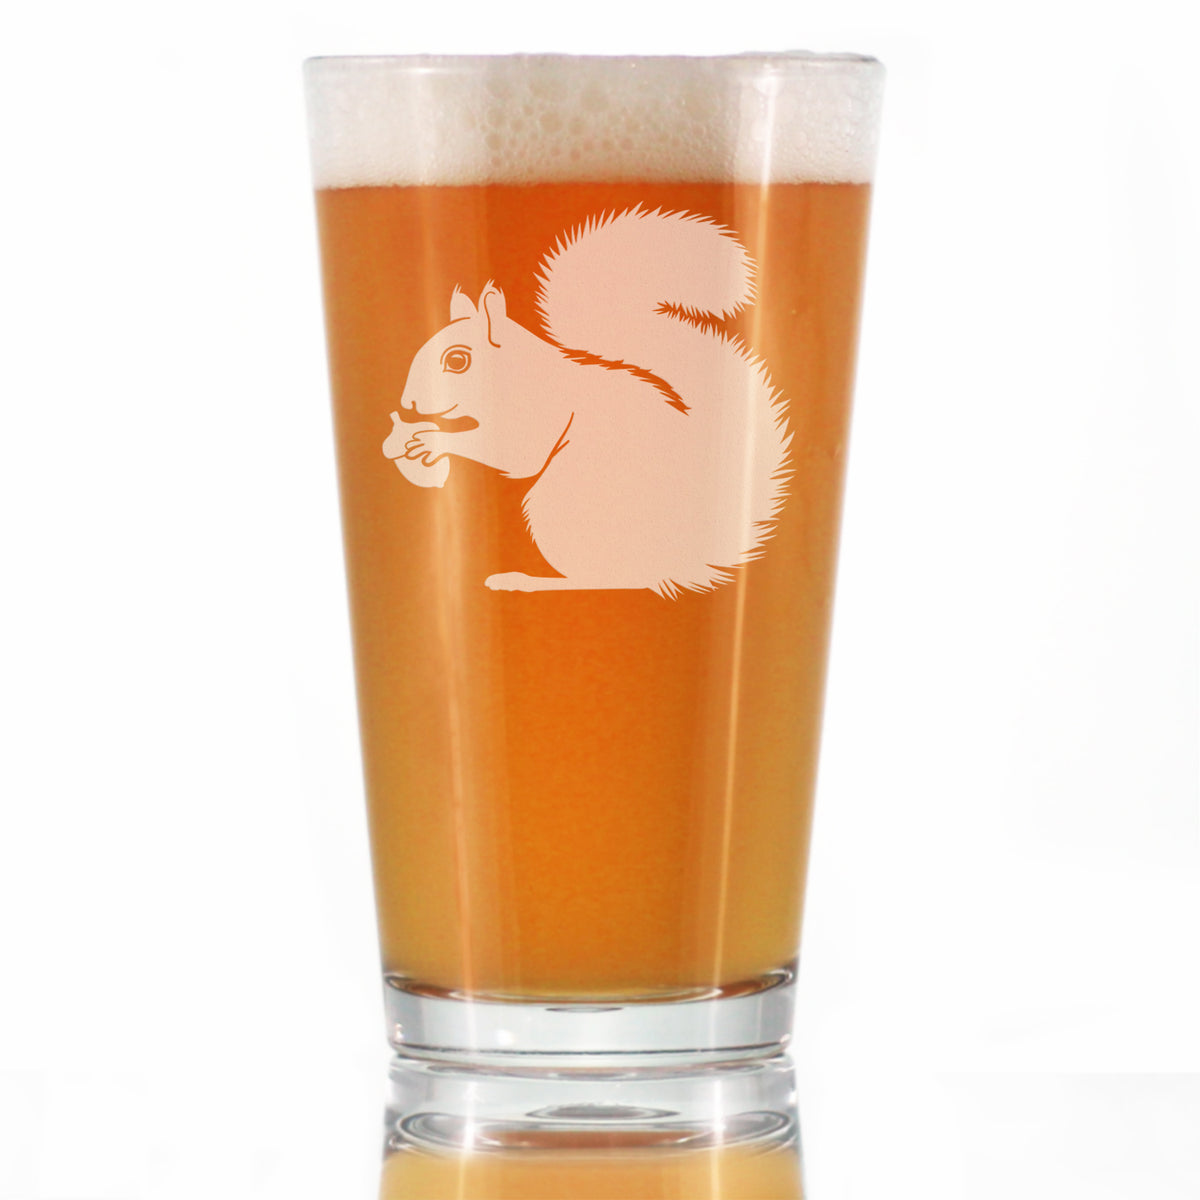 Squirrel Pint Glass for Beer - Squirrel Gifts and Decor with Squirrels - 16 Oz Glasses